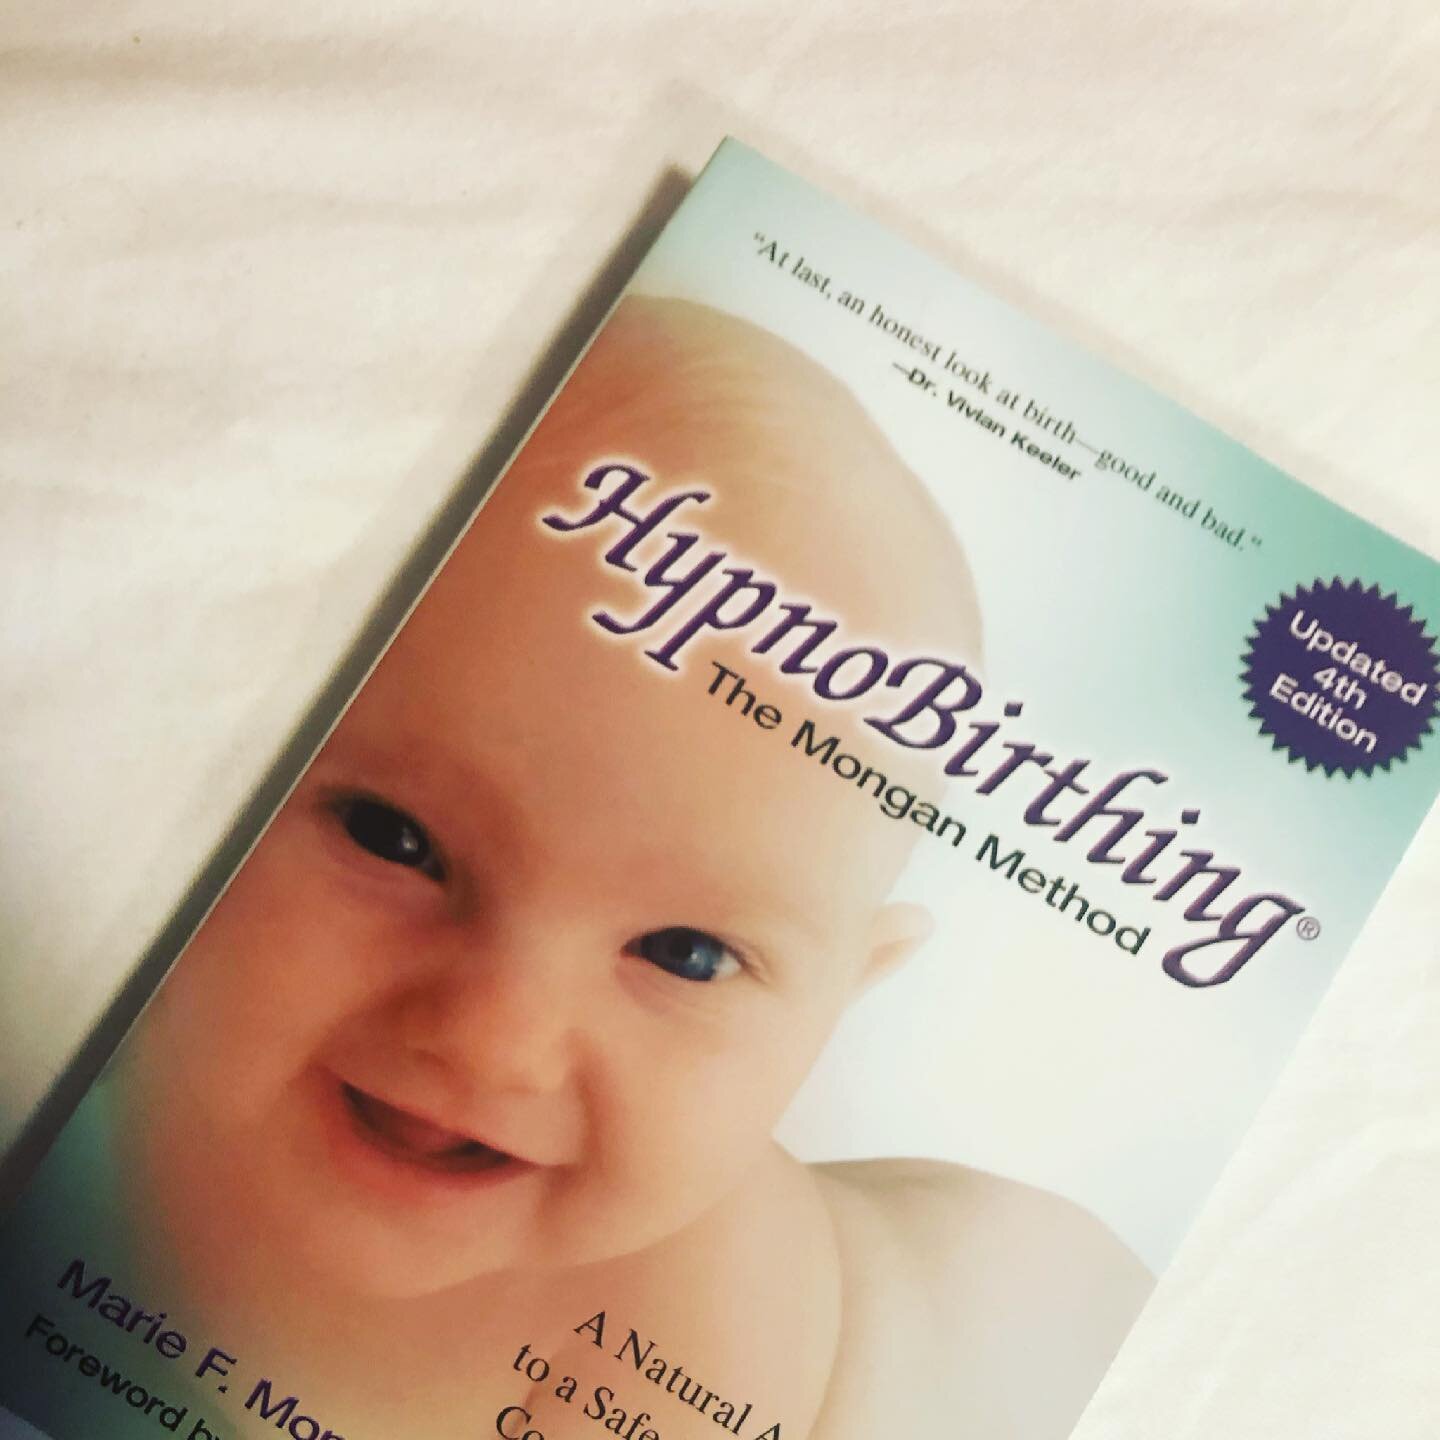 Love teaching HypnoBirthing, especially class number 1. 
#hypnosis #sherwoodpark #hypnobirthing #hypnobirth #hypnobirthingclasses #booktoday #pregnant #naturalbirth